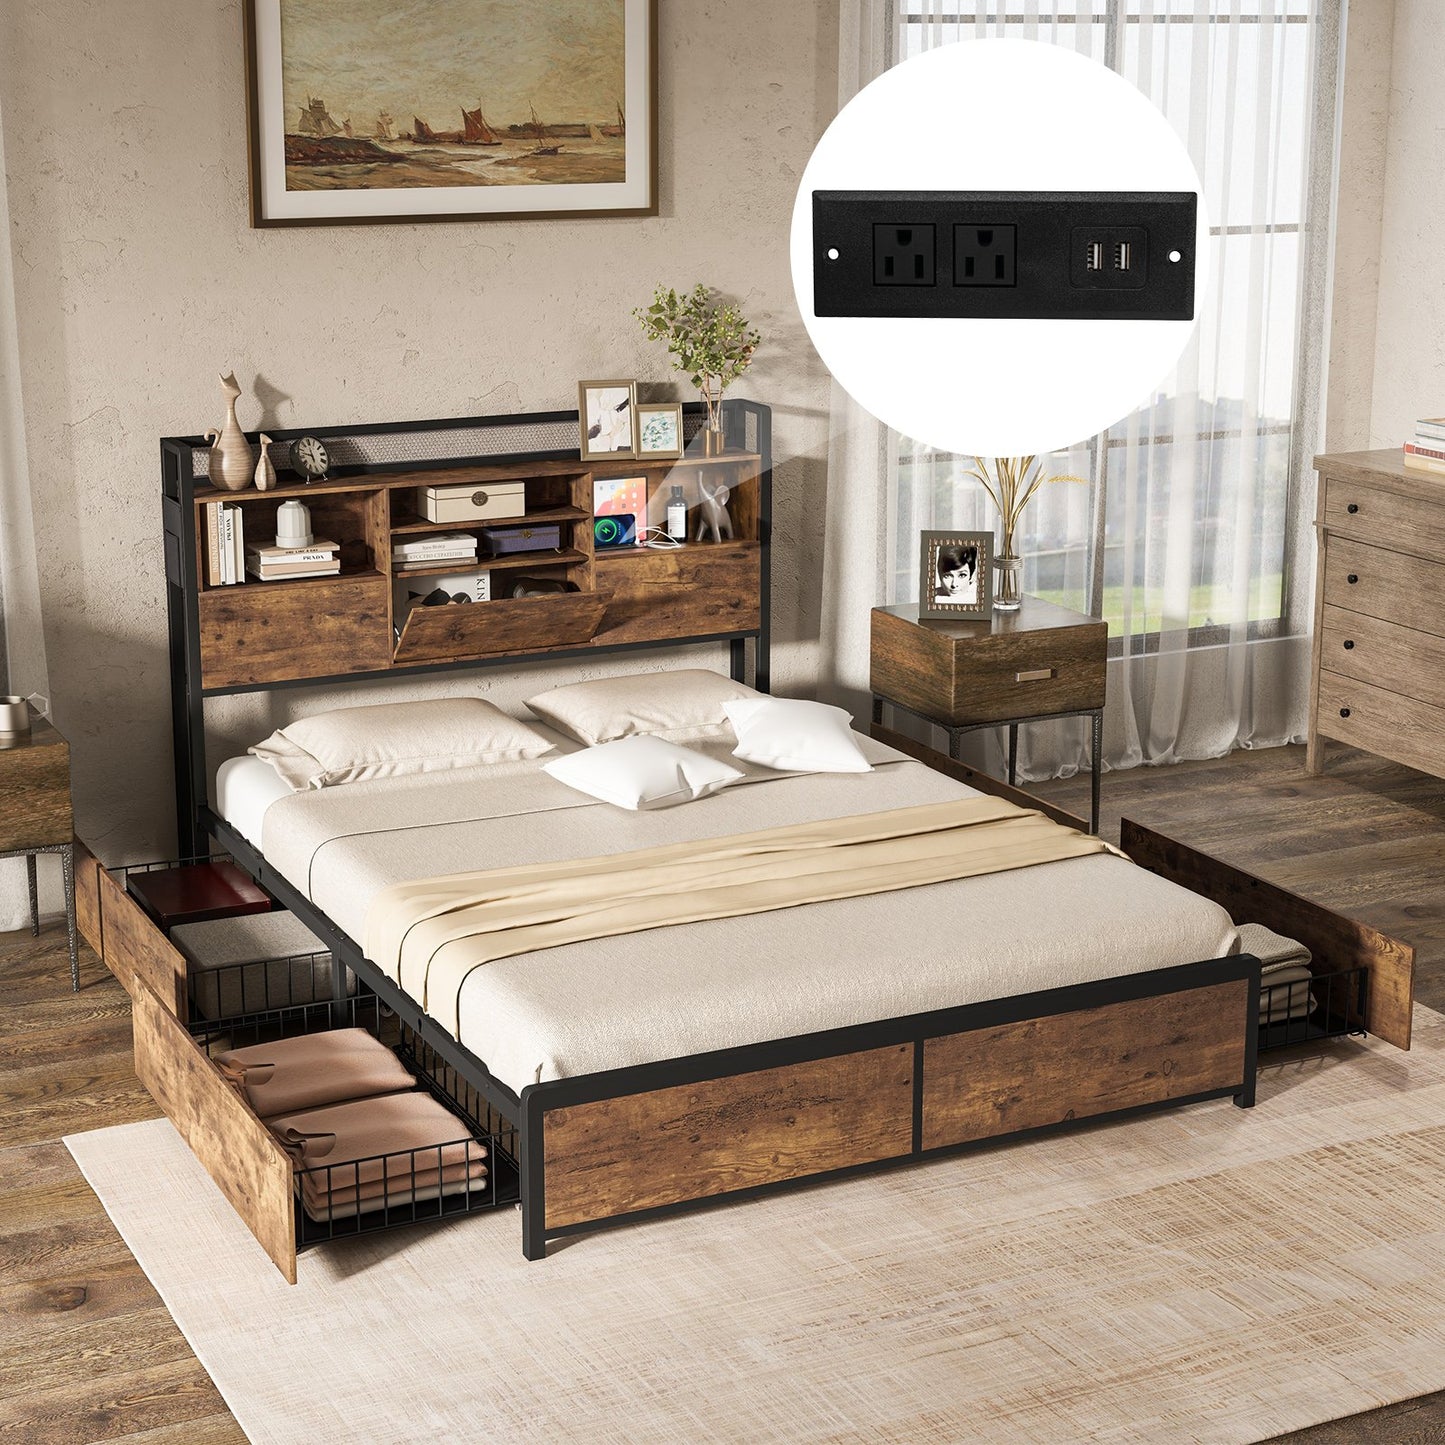 Full/Queen Size Bed Frame with Bookcase Headboard and 4 Storage Drawers-Full Size, Rustic Brown